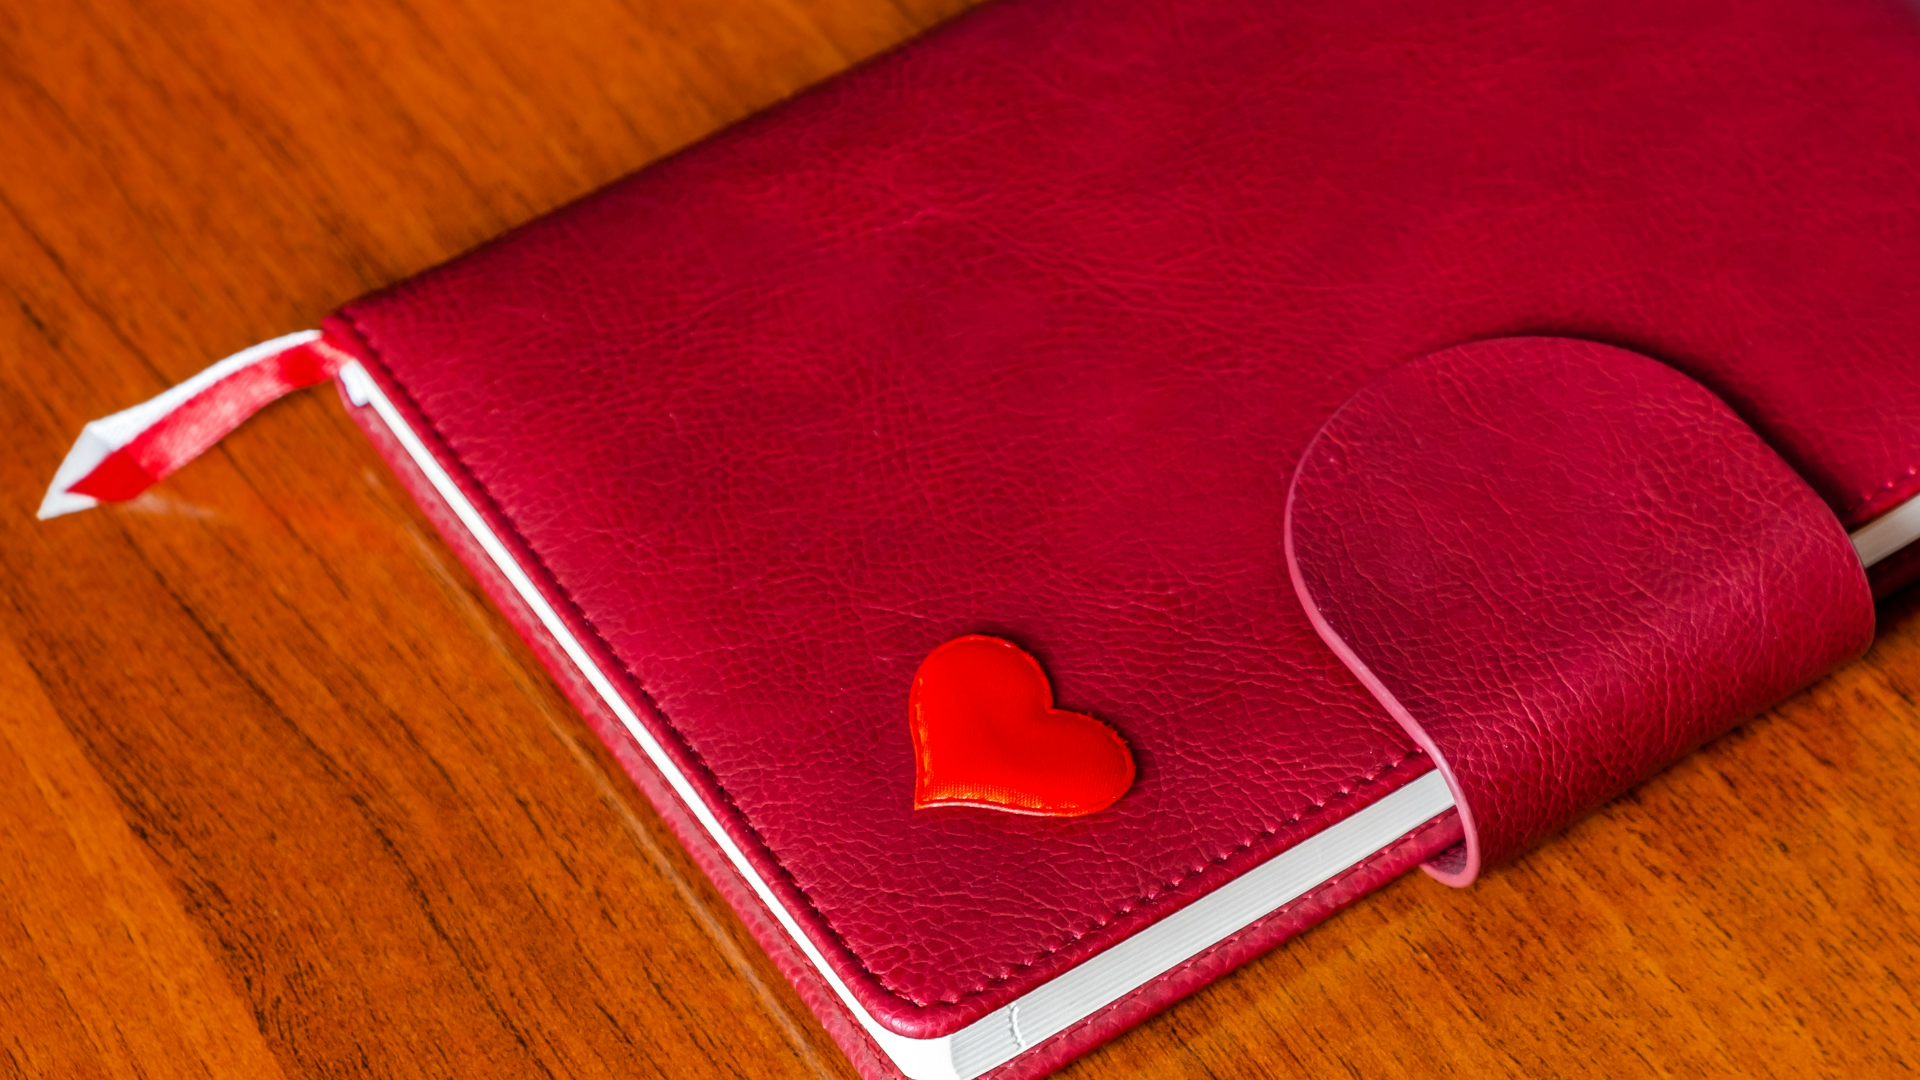 Red note book with red heart emblem on bottom right corner